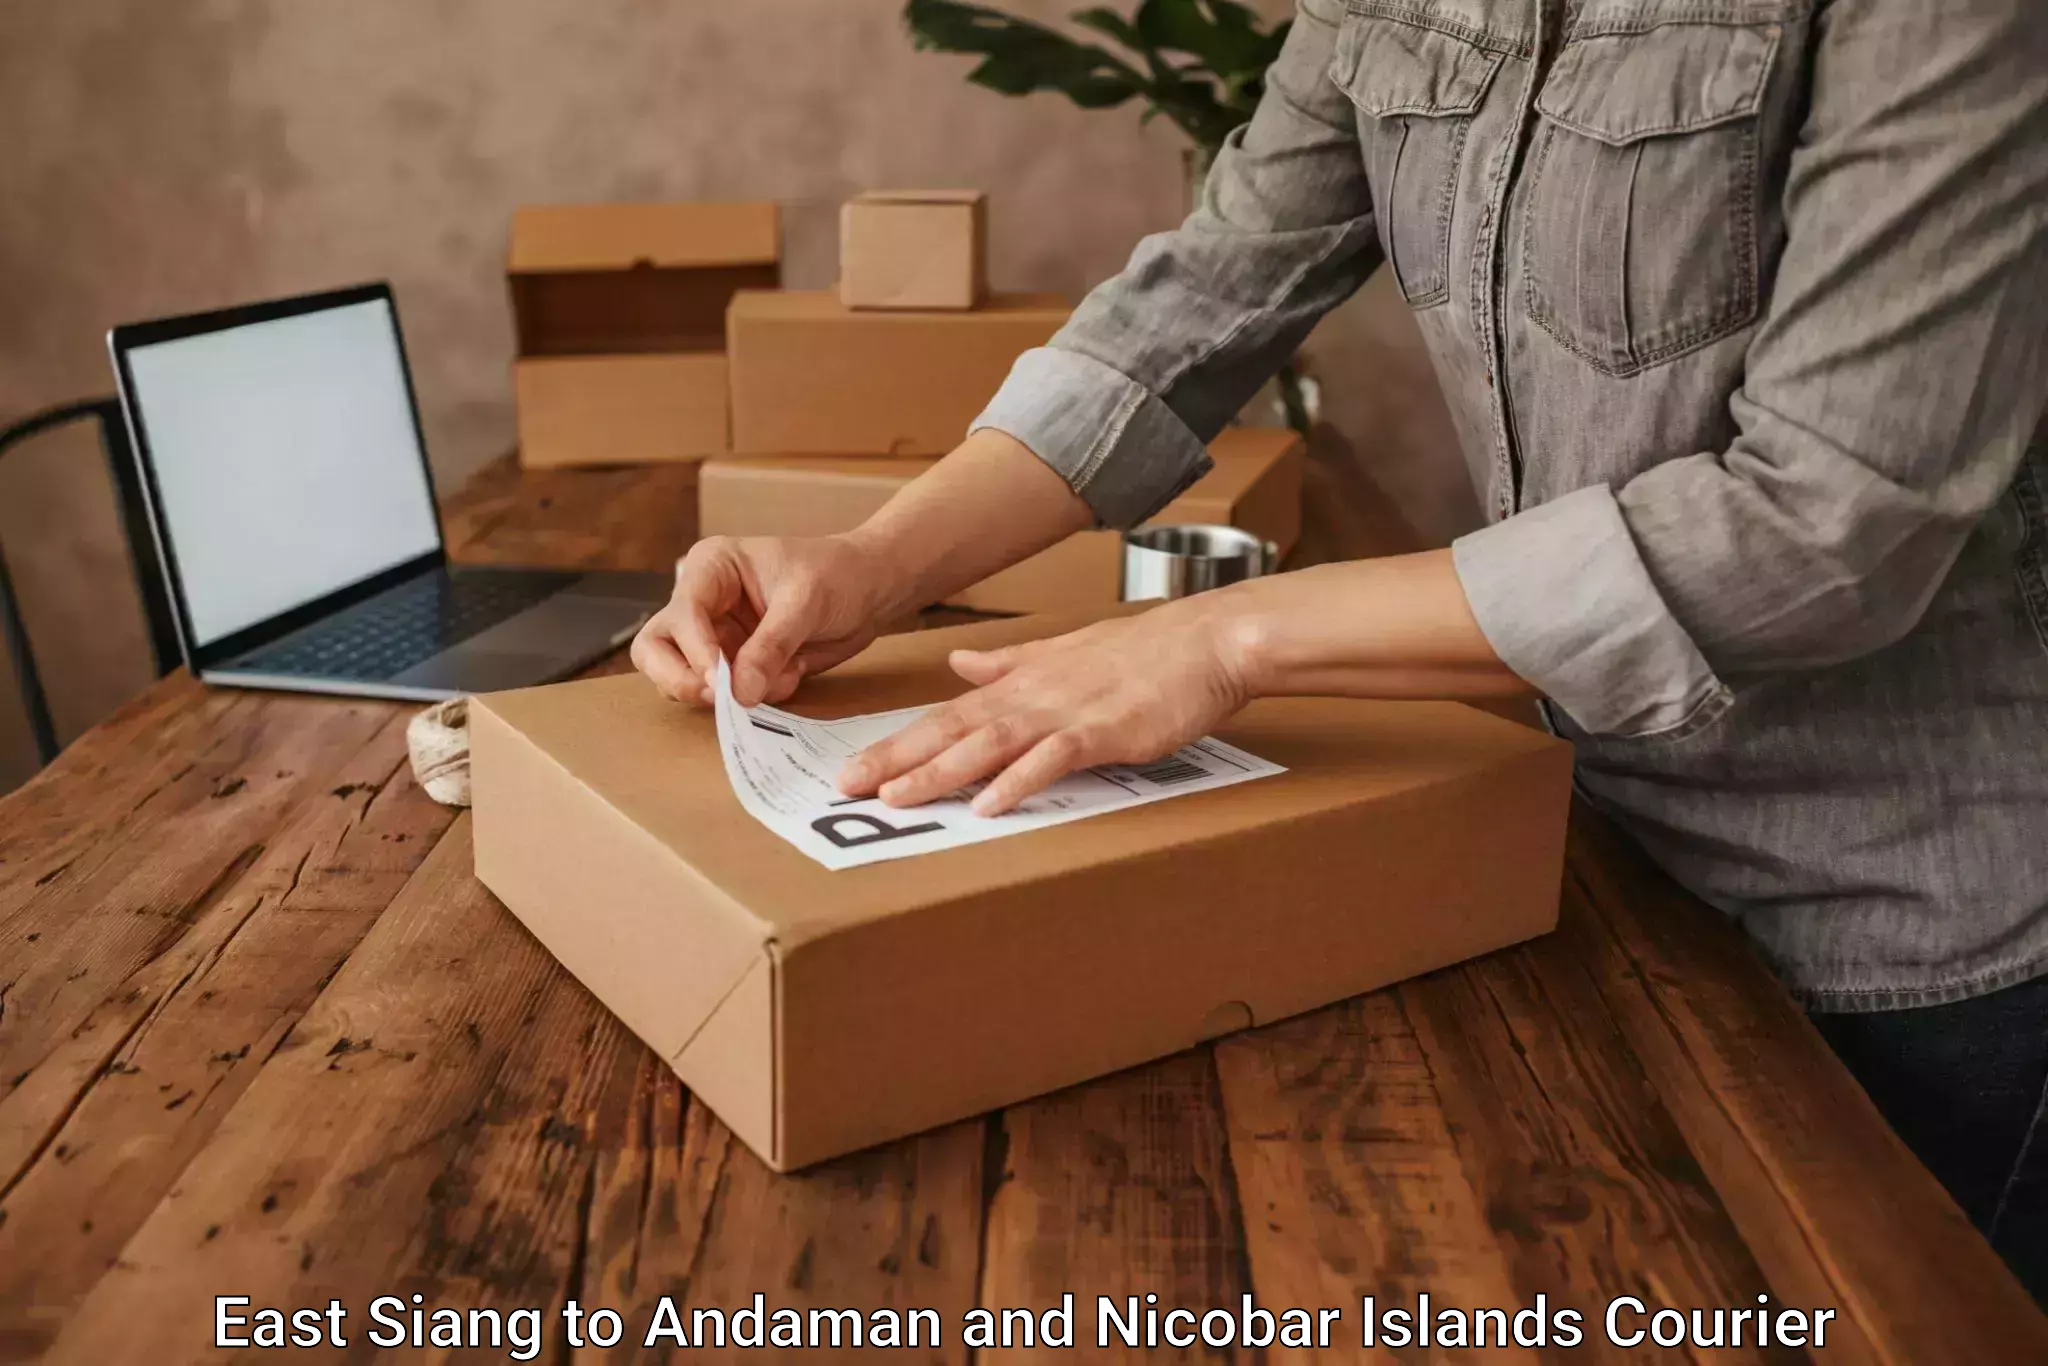 Urban courier service East Siang to Andaman and Nicobar Islands